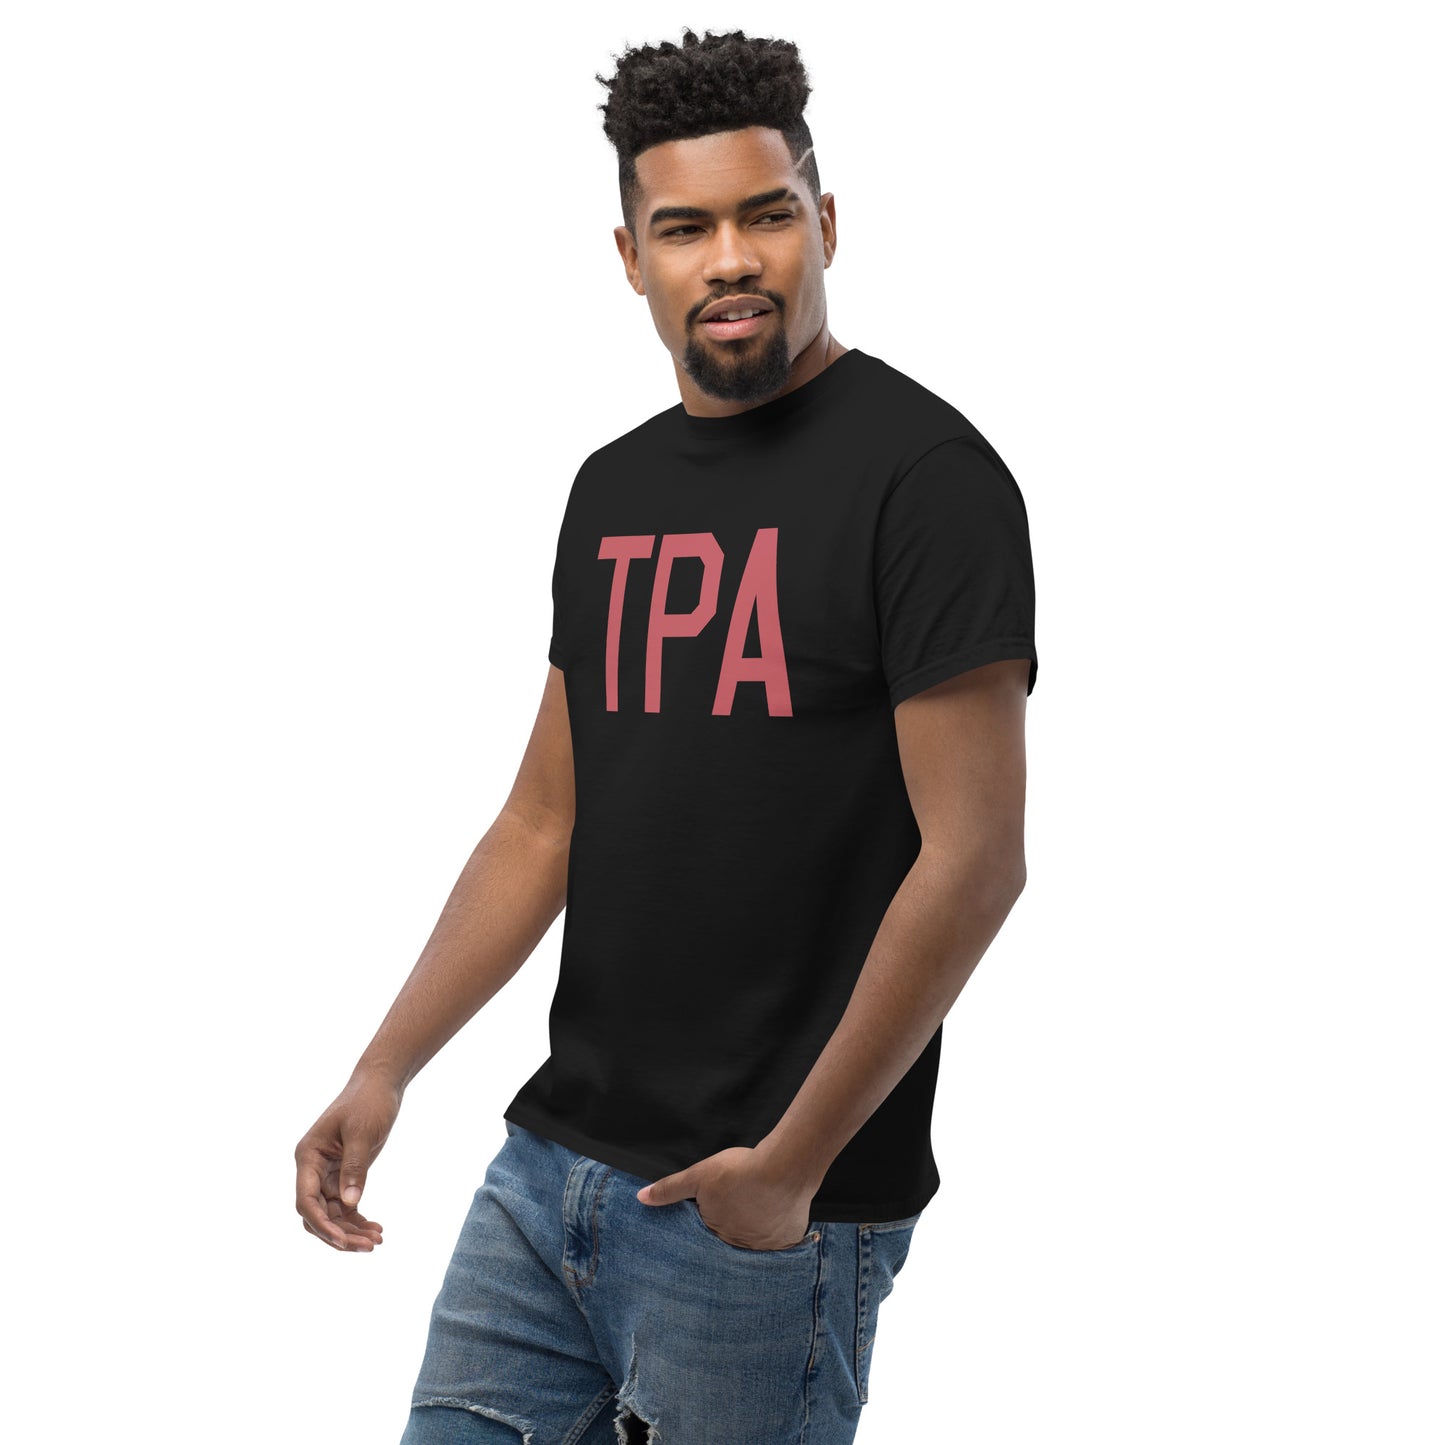 Aviation Enthusiast Men's Tee - Deep Pink Graphic • TPA Tampa • YHM Designs - Image 07